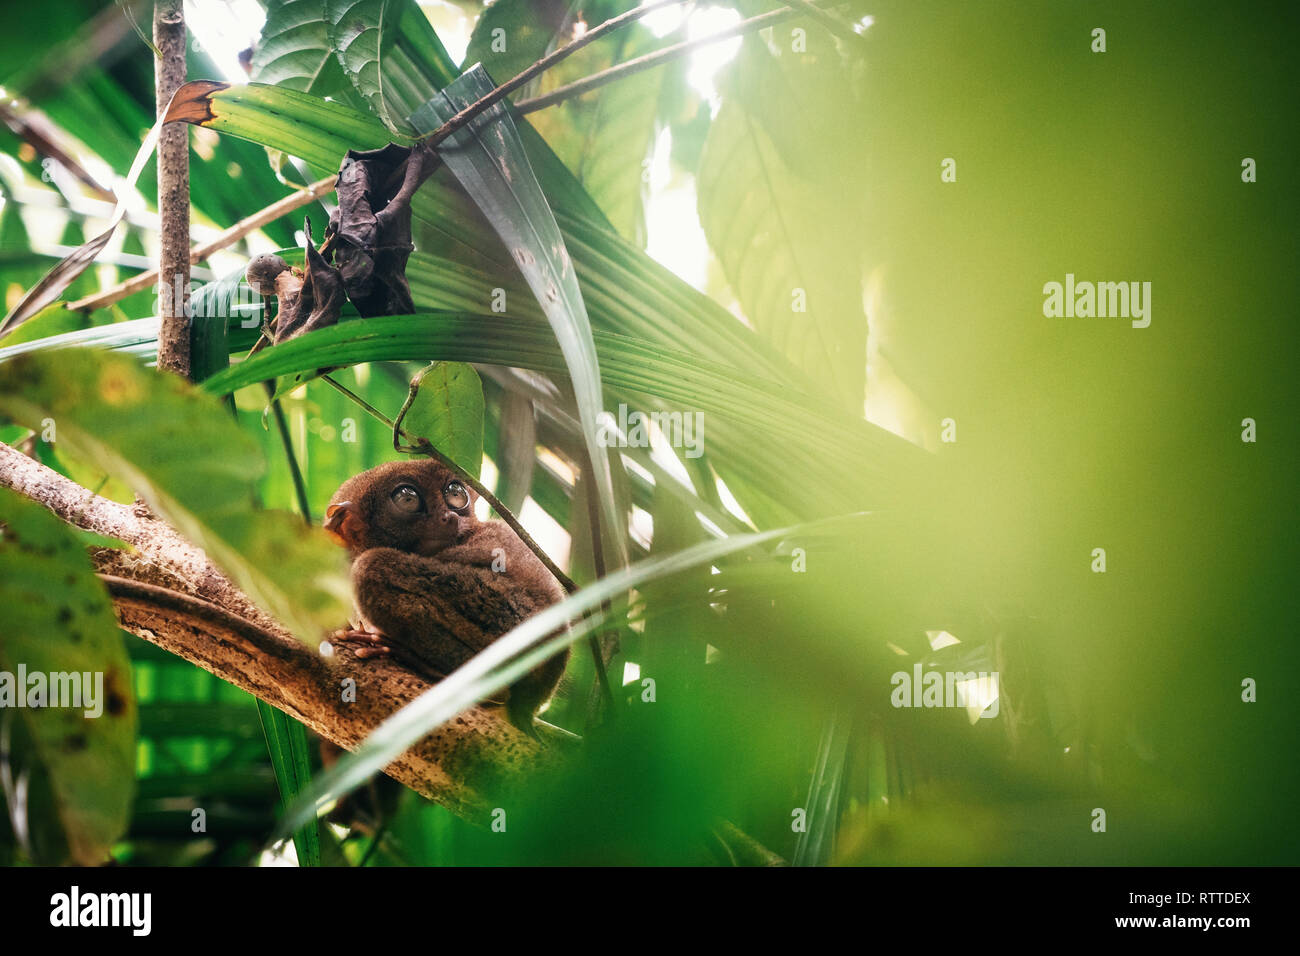 Tarsier sitting on branch with green leaves in jungle, Bohol island, Philippines. Stock Photo